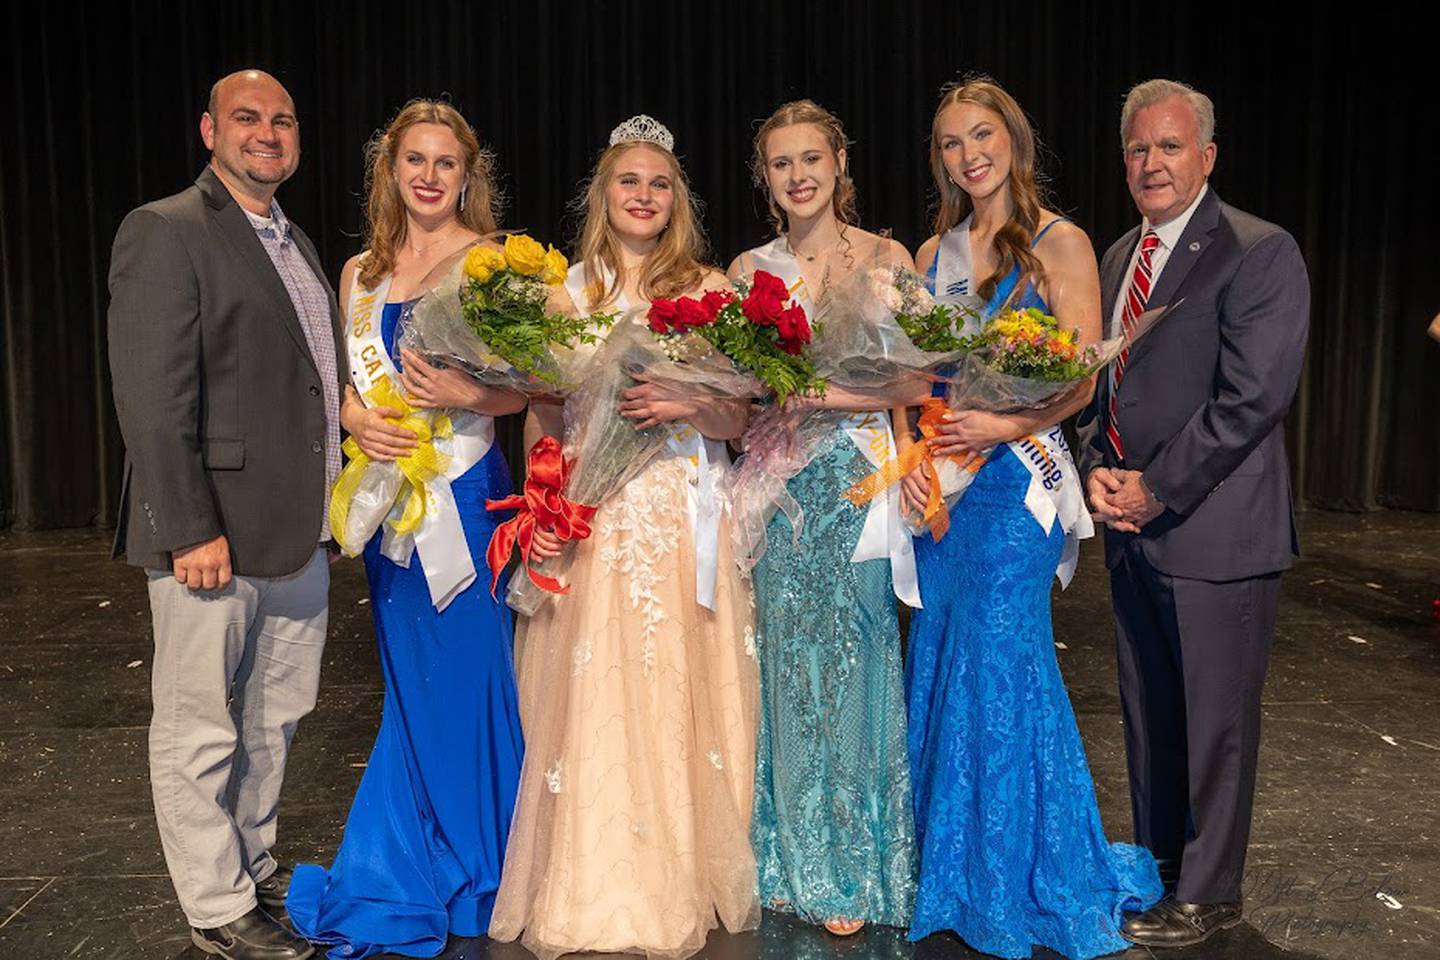 The 2023 MIss Cary-Grove Business Leadership Pageant was held May 17, 2023 at Cary-Grove High School. Pictured (L to R): Marc McLaughlin, third place finisher Megan Streit, Miss Cary-Grove Alexa Snyder, runner up Kaitlyn Maynor, Miss Congeniality Madison Reed and Cary Mayor Mark Kownick